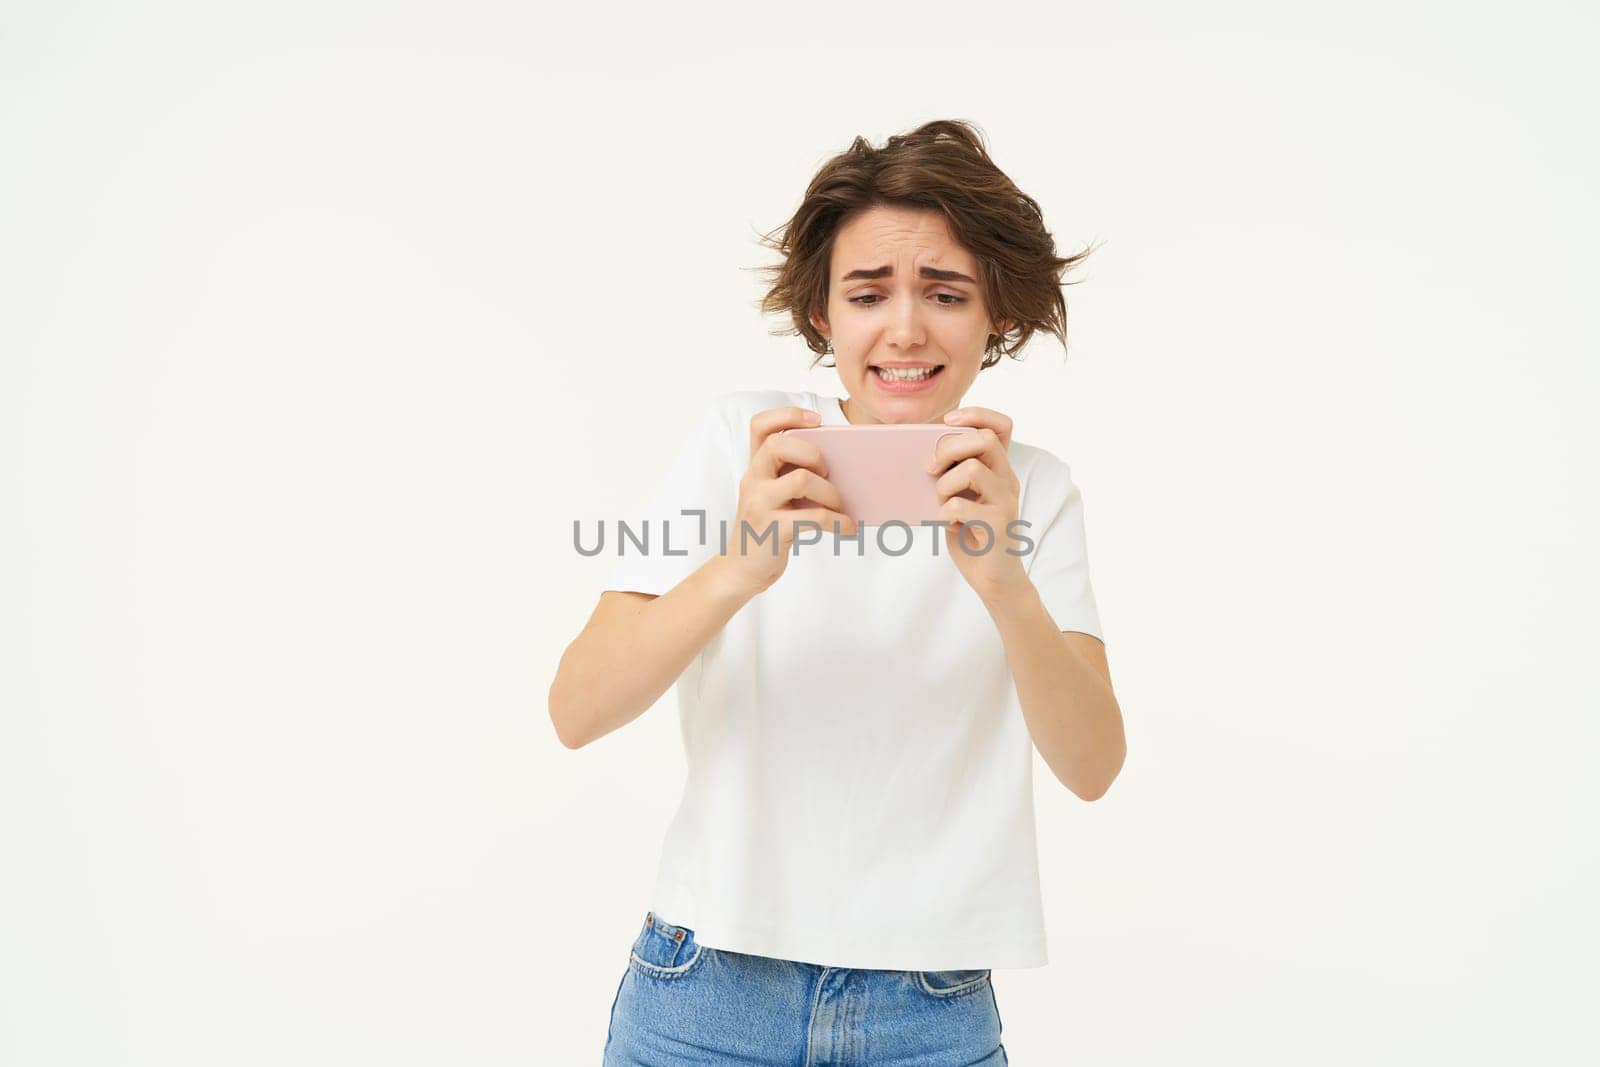 Portrait of woman playing video games on mobile phone, holding smartphone with both hands, standing over white studio background.